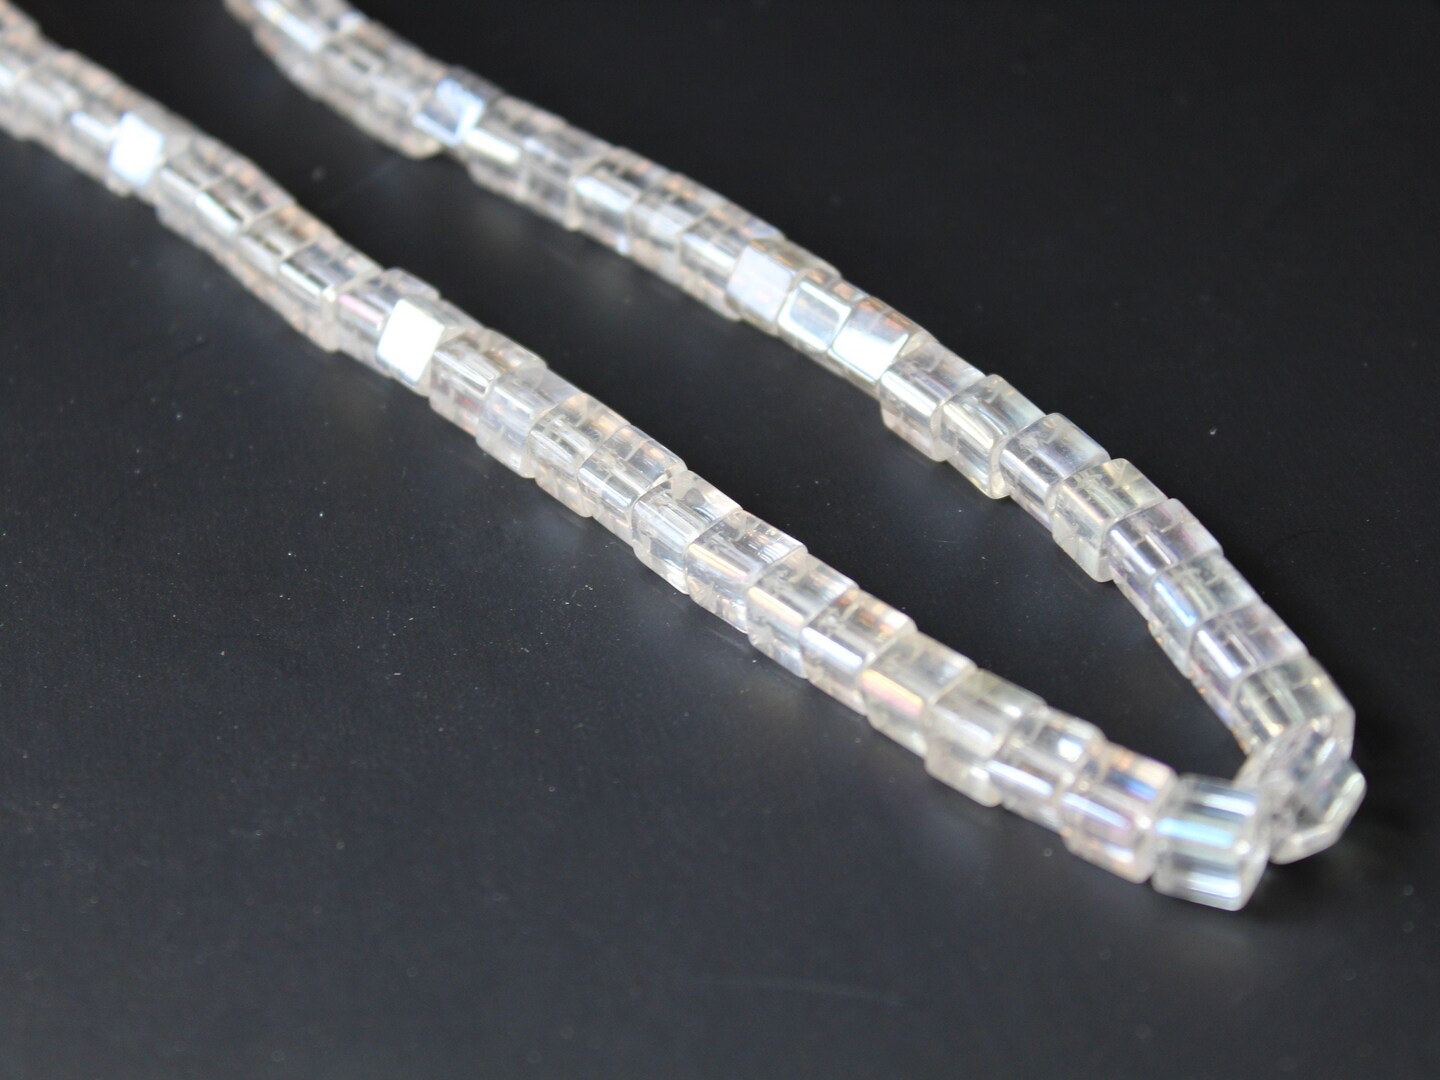 49 6mm Clear Crystal Cube Beads Crystal Glass Beads Full Strand Colorless Spacer Beads